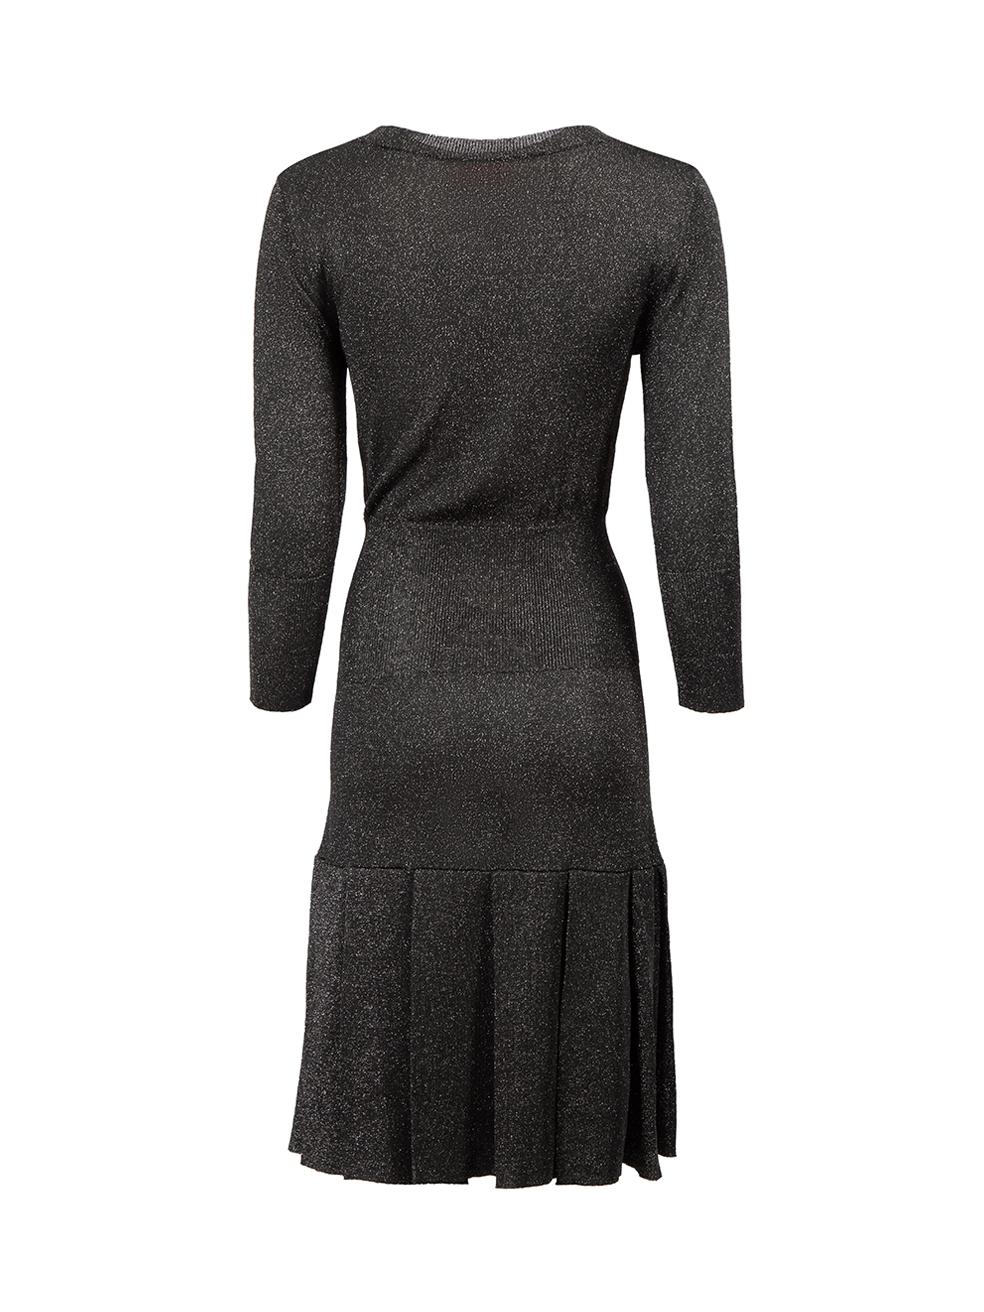 Vivienne Westwood Red Label Black Glitter Jersey Knee Length Dress Size L In Good Condition For Sale In London, GB